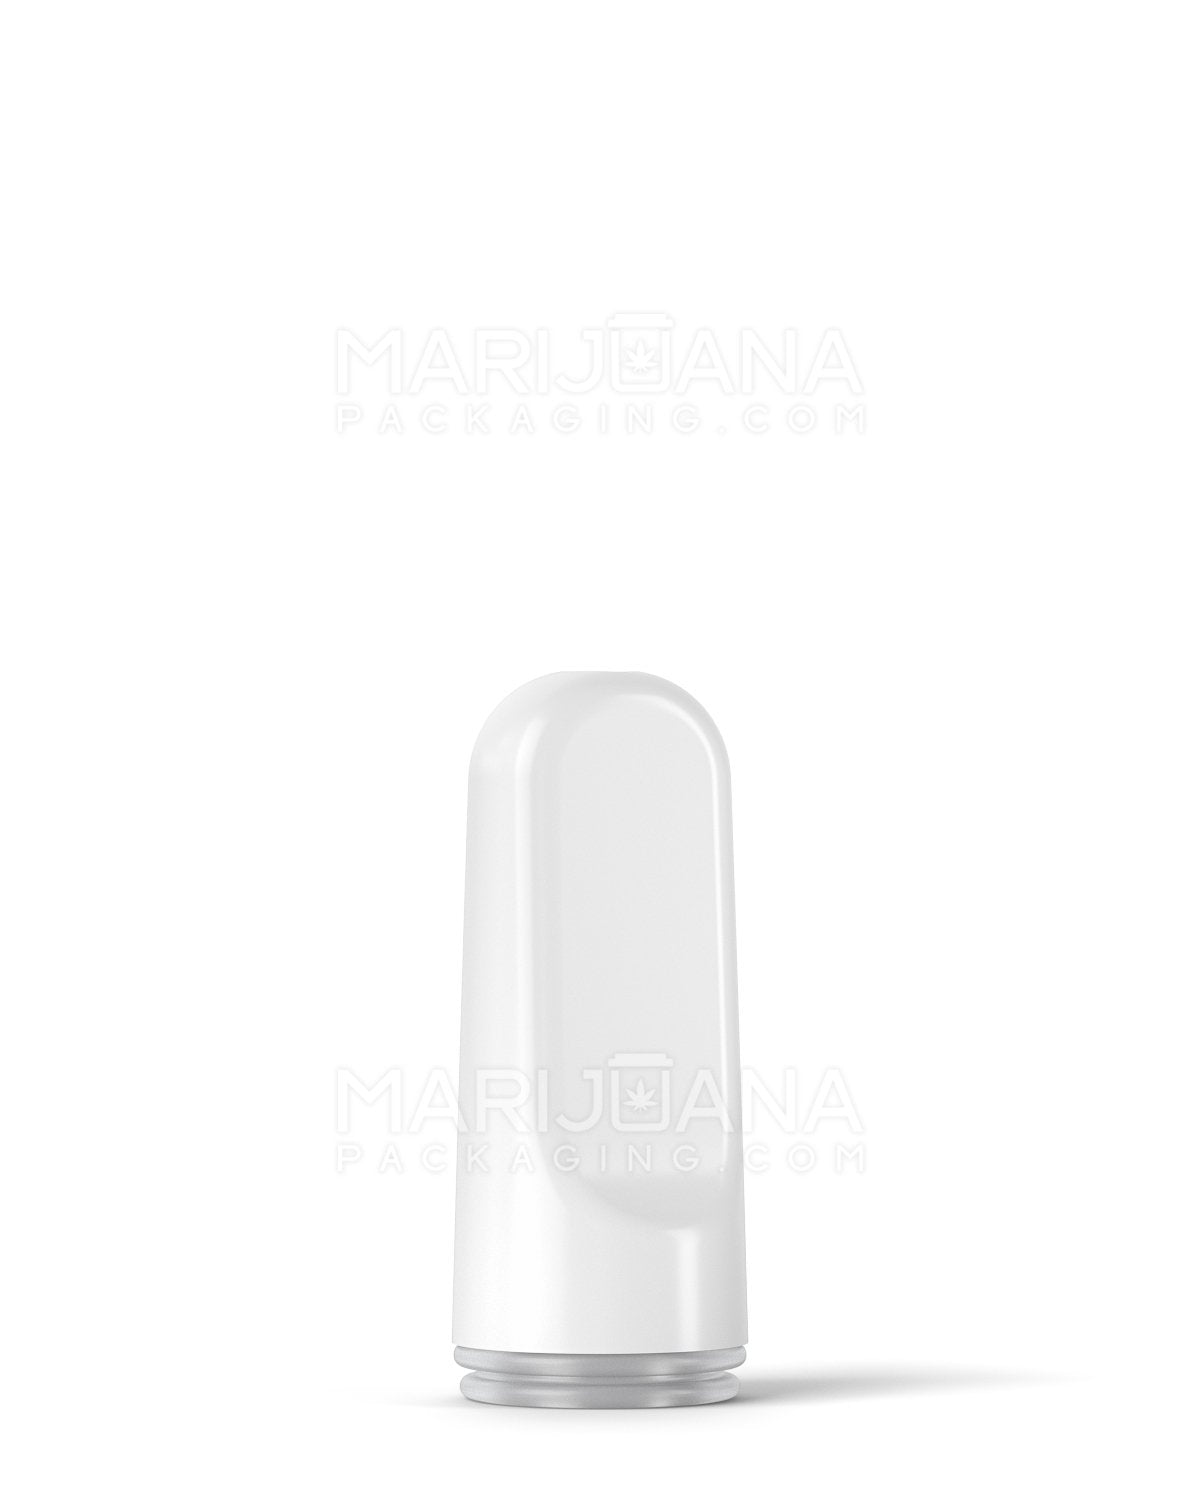 AVD | Flat Vape Mouthpiece for GoodCarts Glass Cartridges | White Ceramic - Screw On - 600 Count - 2